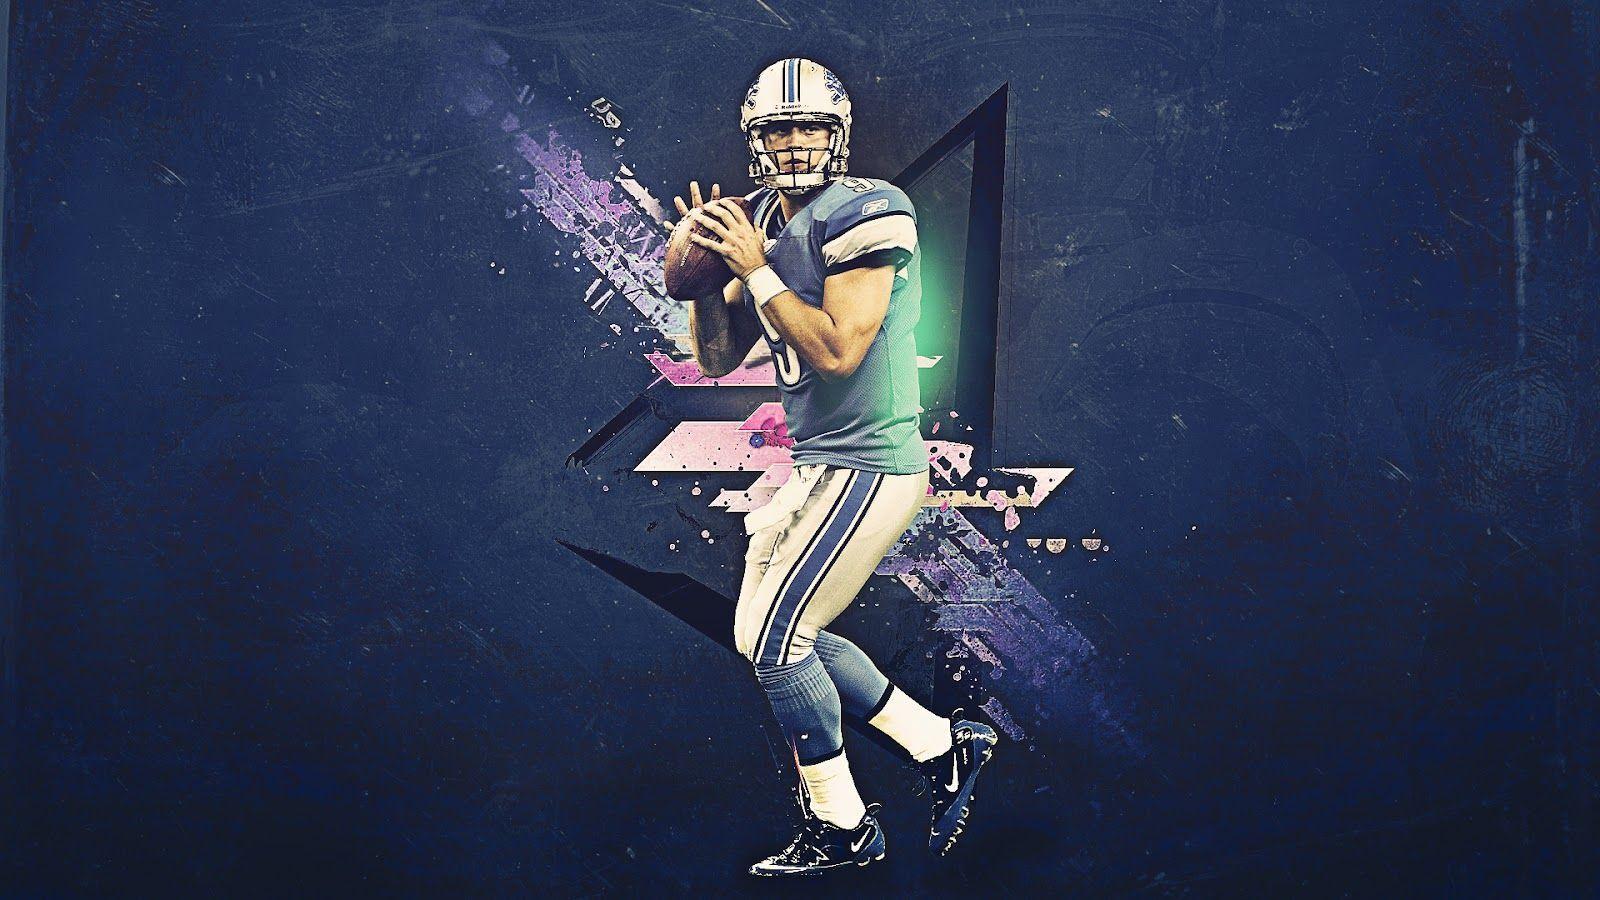 image For > Matthew Stafford Lions Wallpaper